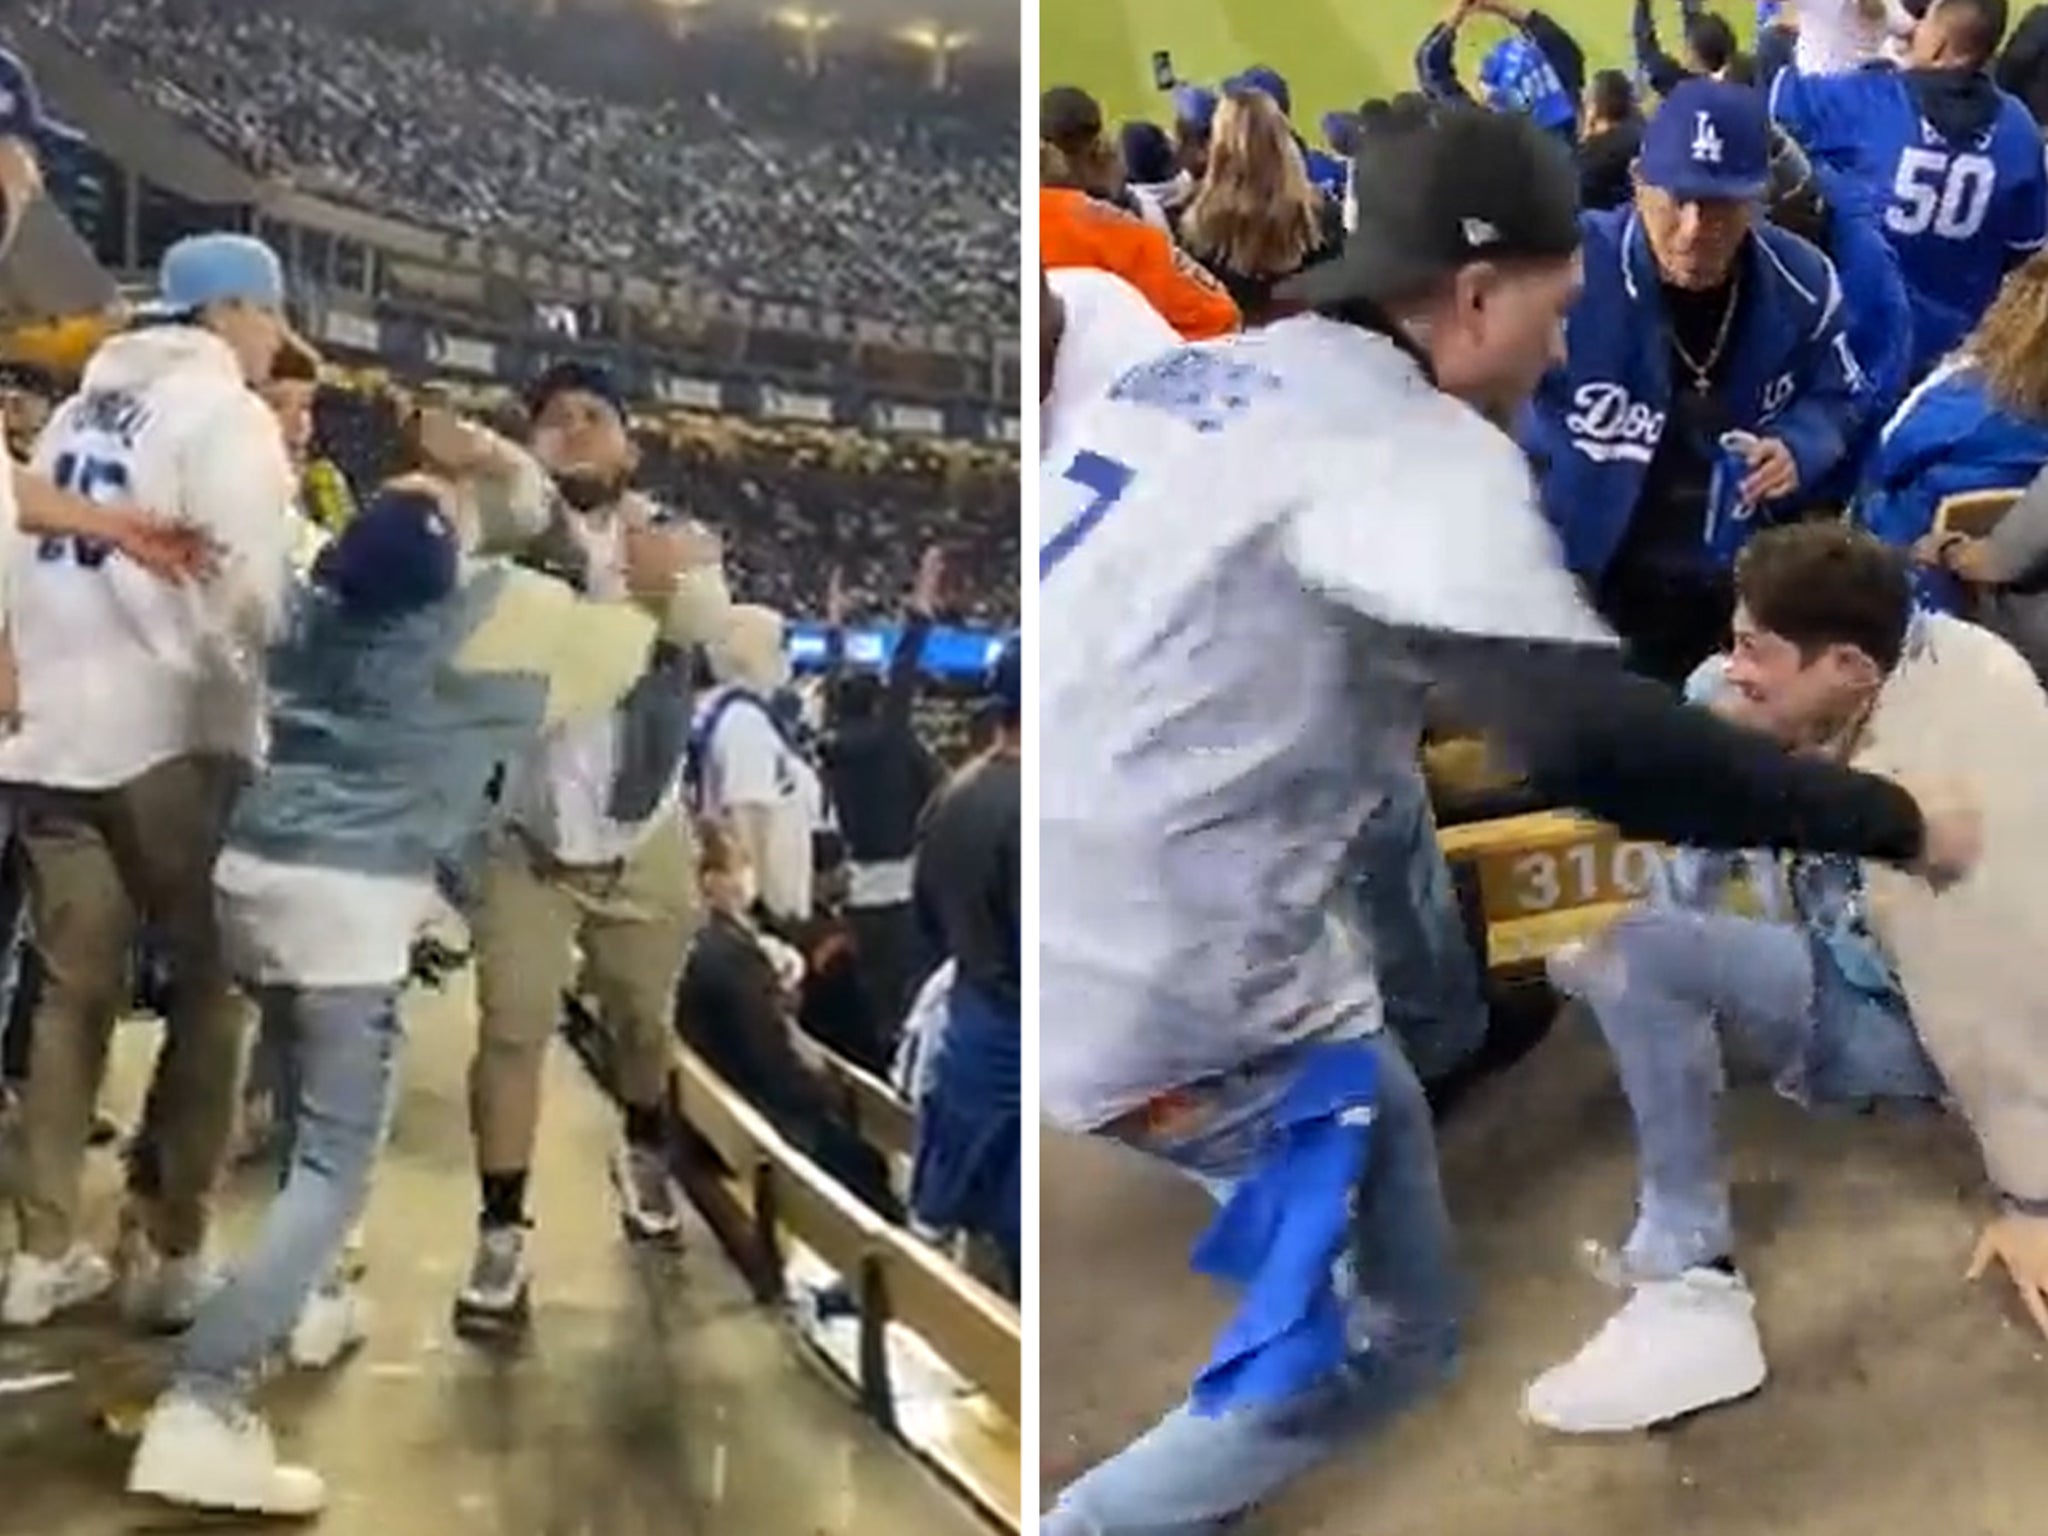 Los Angeles Dodgers fans trade punches and fight among themselves